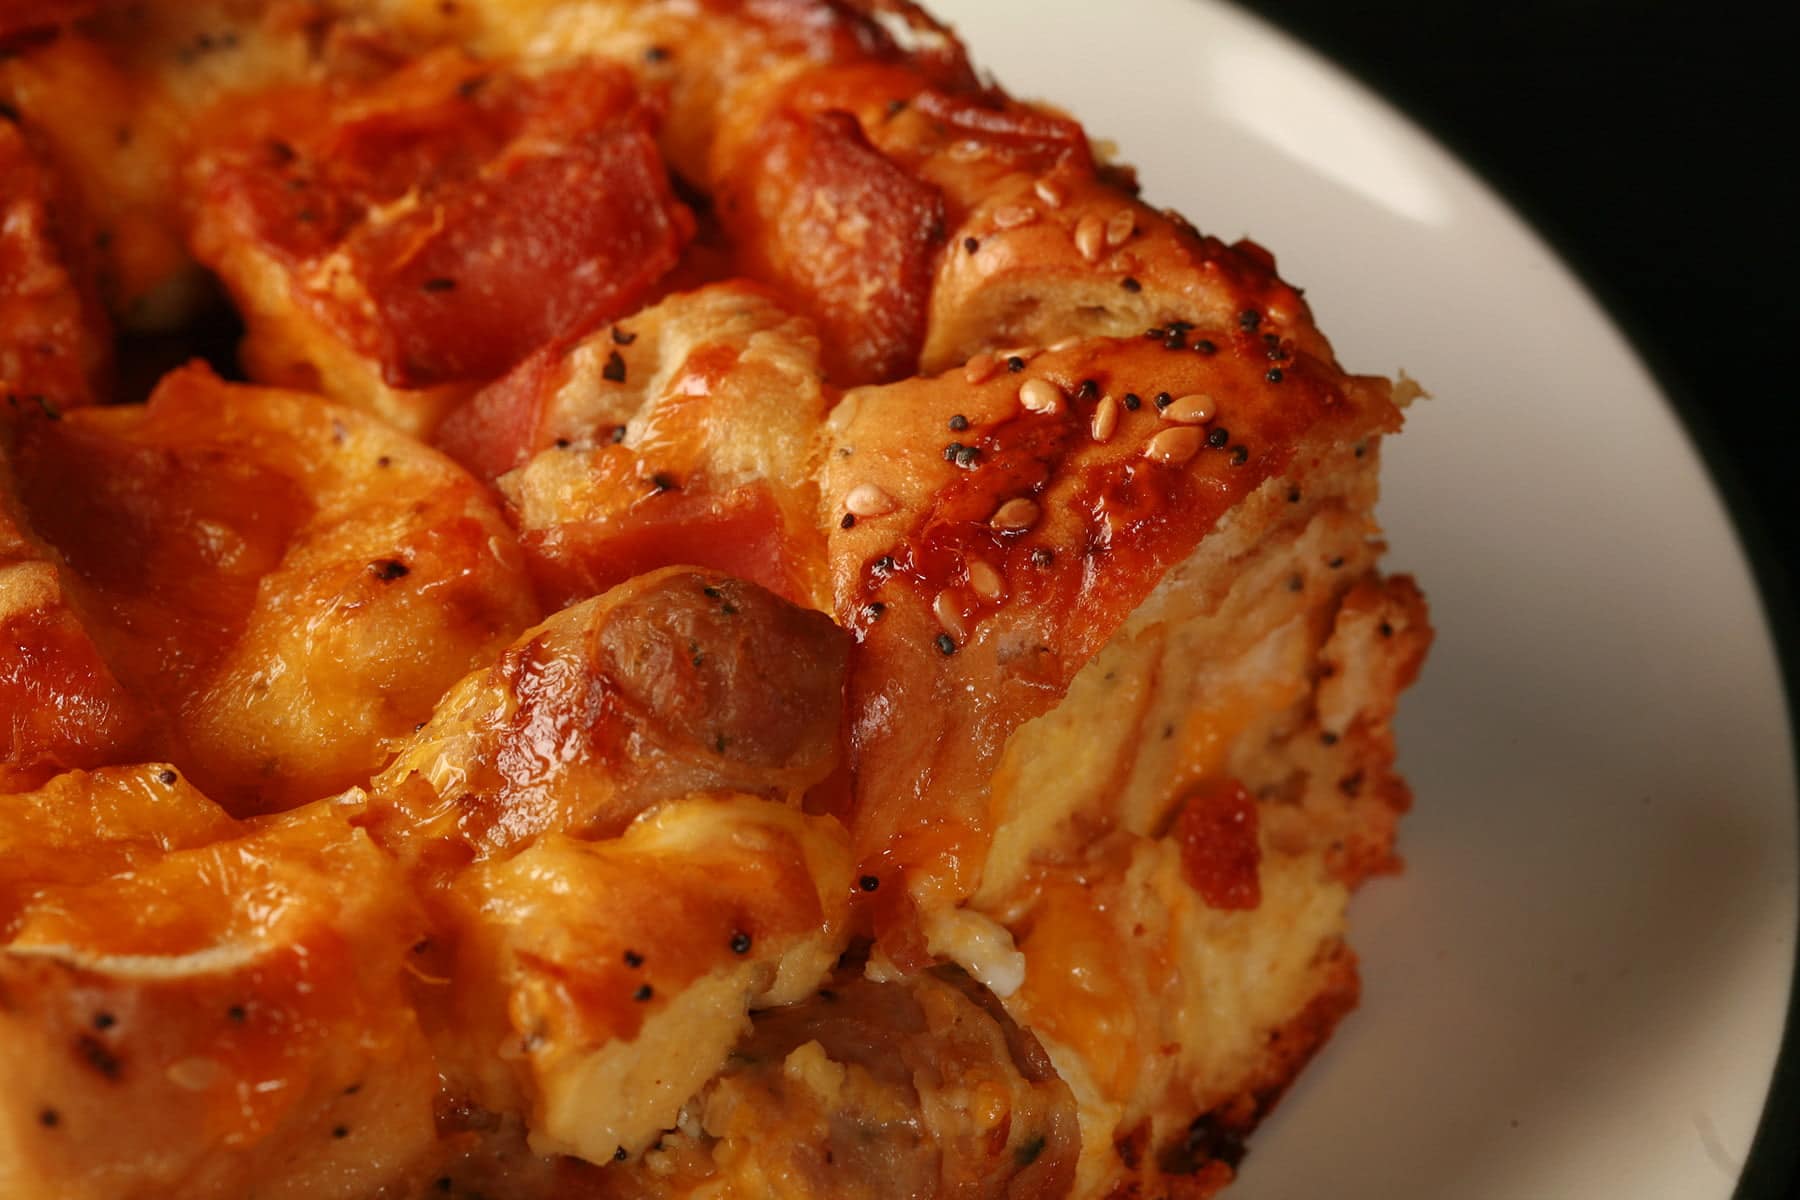 A square serving of breakfast bagel strata. Eggs, bacon, chunks of bagel, and pieces of sausage are visible in the cheesy casserole.